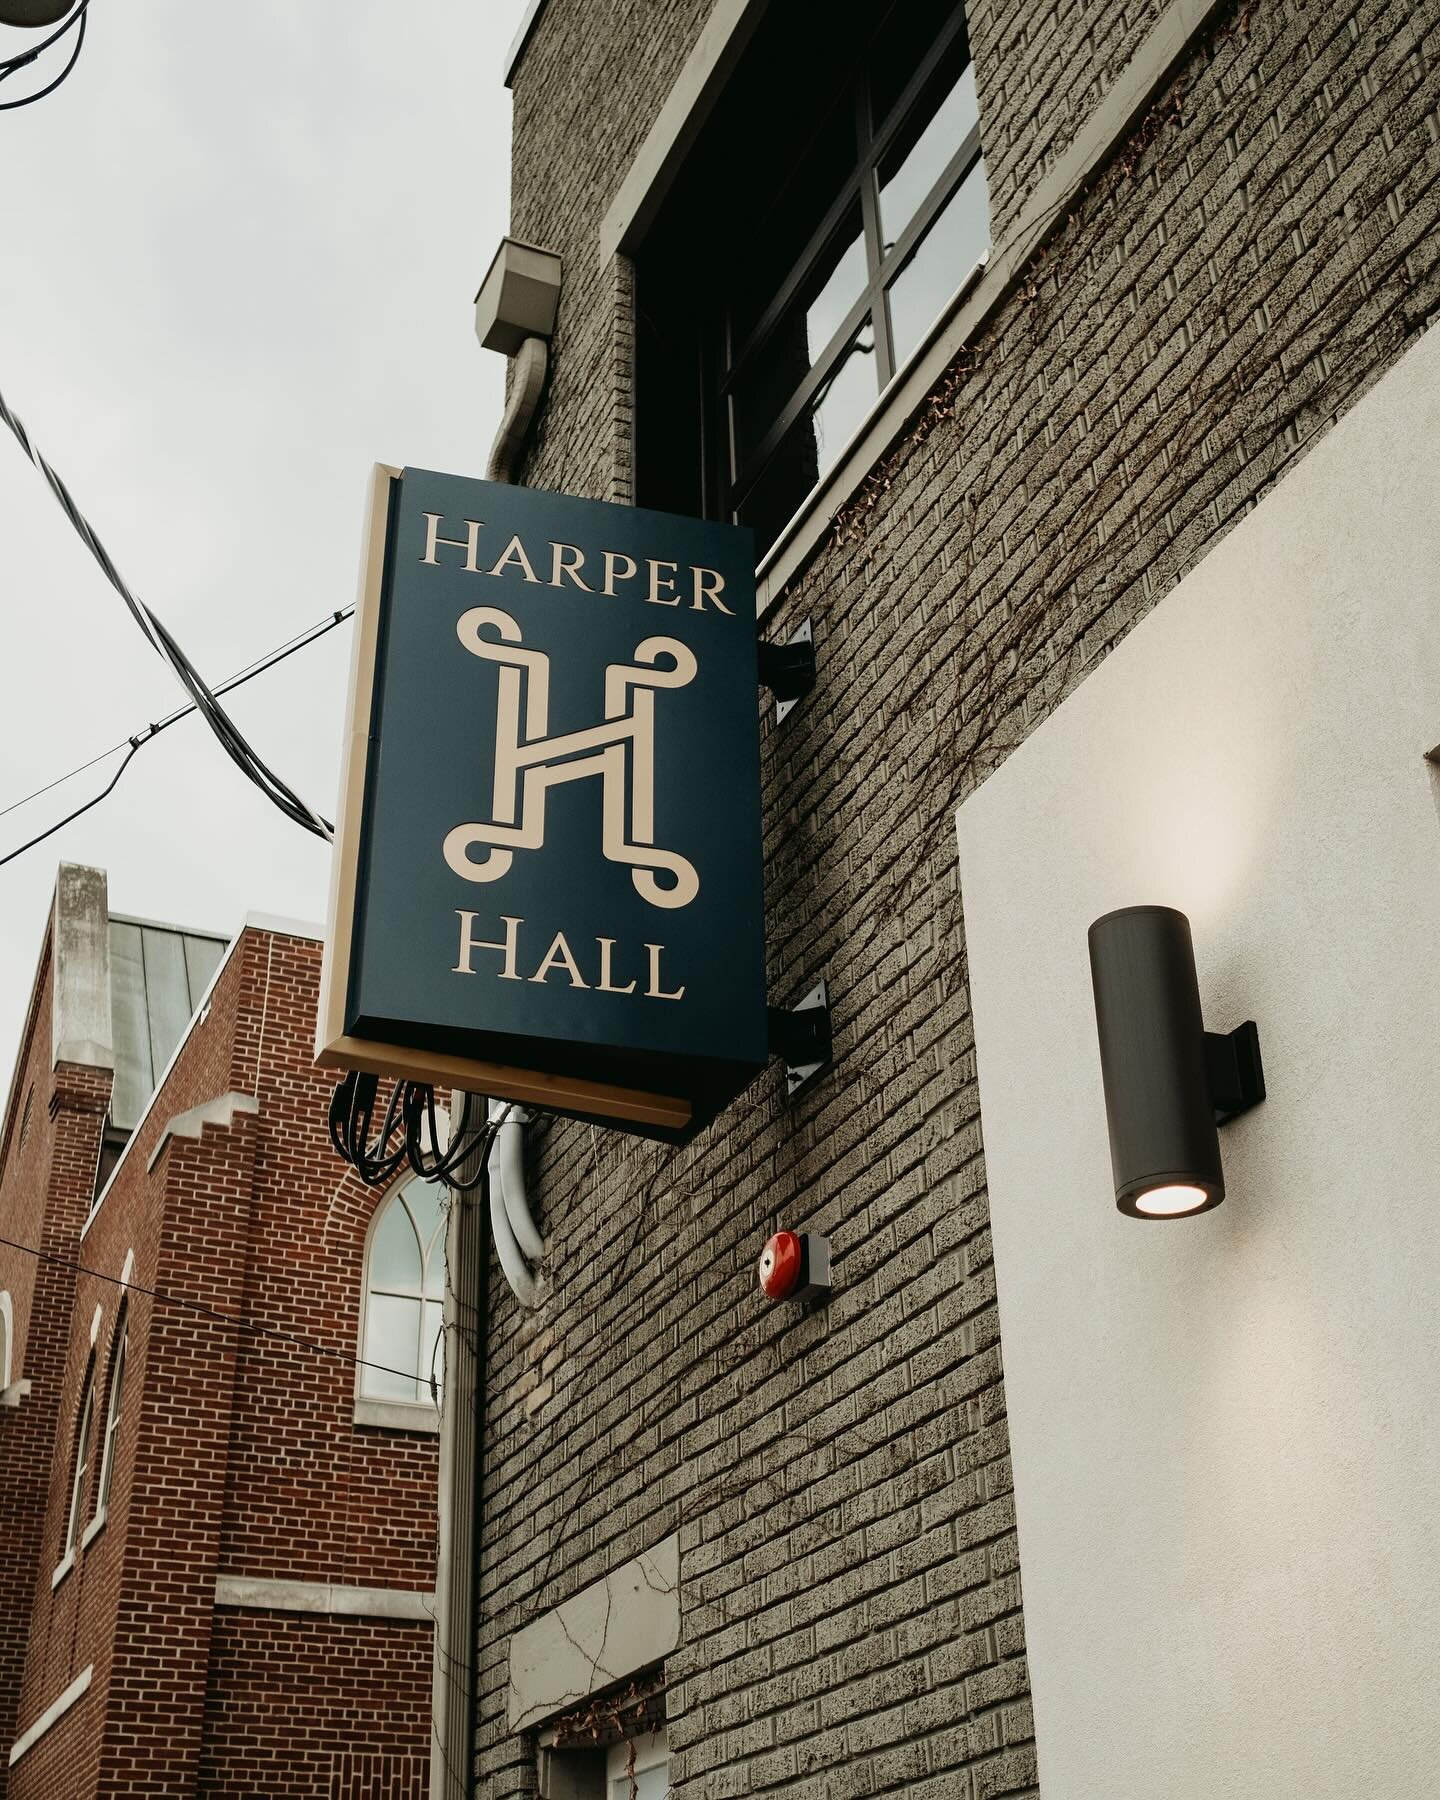 Located in the heart of downtown Lexington, make Harper Hall the setting of lifes most precious memories ✨

Book with us today!

📸 @shaexjes

#weddingvenue #kentuckywedding #sharethelex #downtownlexington #eventvenue